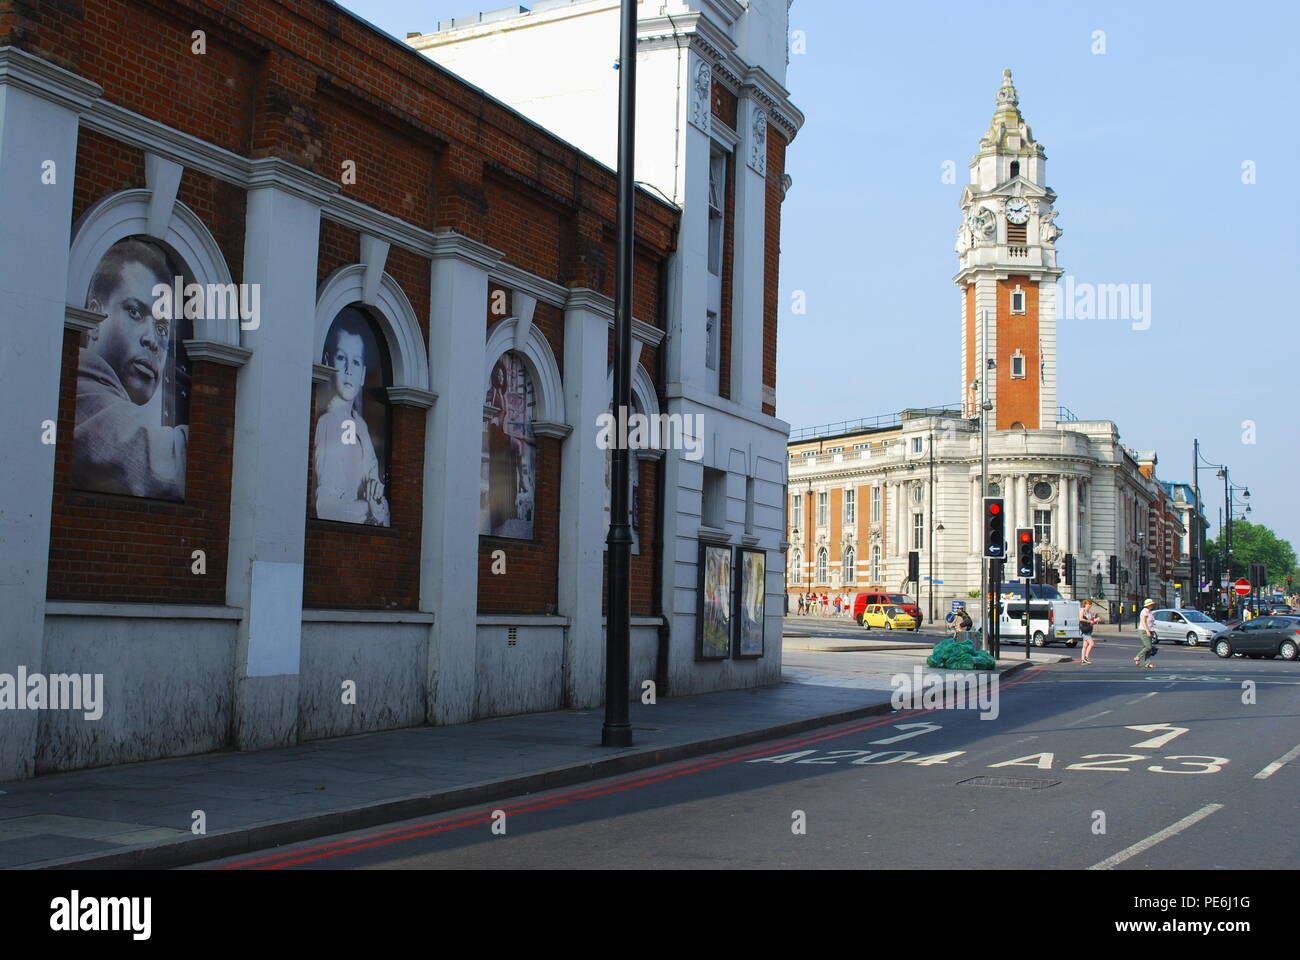 Lambeth Town Hall and The Ritzy Cinema in Brixton, South London Stock Photo